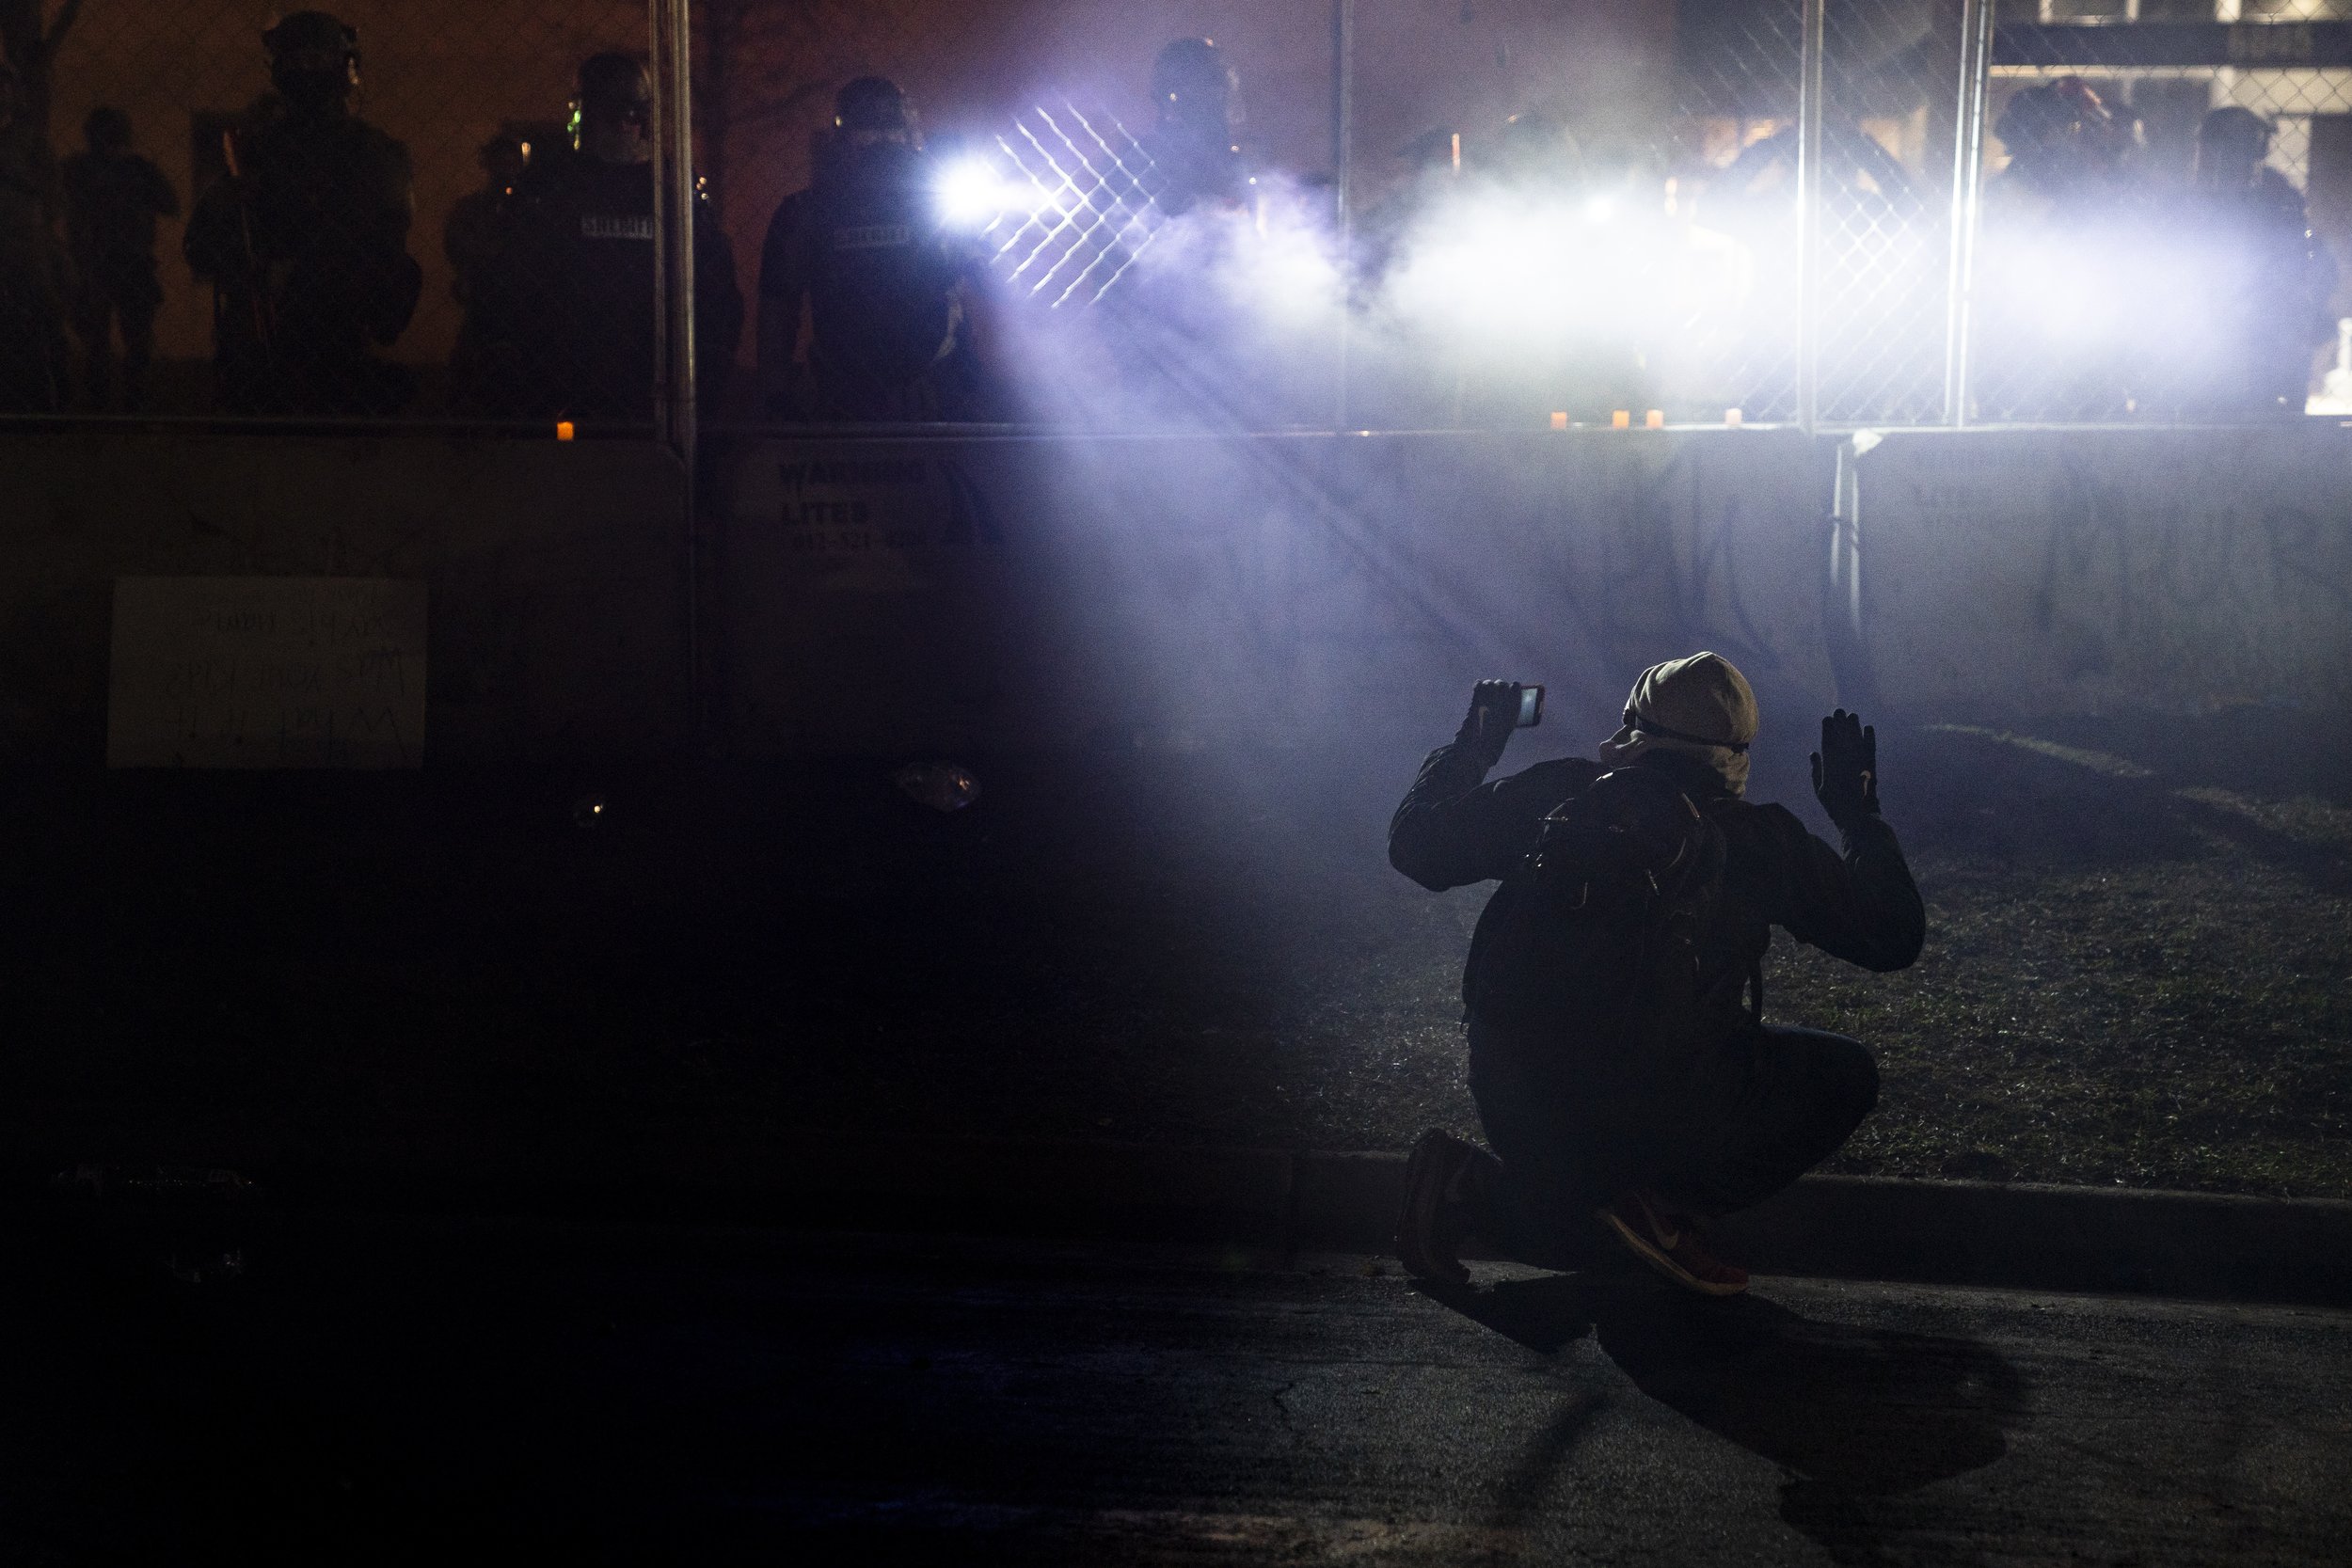  Police shine lights on a demonstrator with raised hands during a protest outside the Brooklyn Center Police Department in Brooklyn Center, Minn., on April 14, 2021, over the fatal shooting of Daunte Wright, a Black man, by a white police officer dur